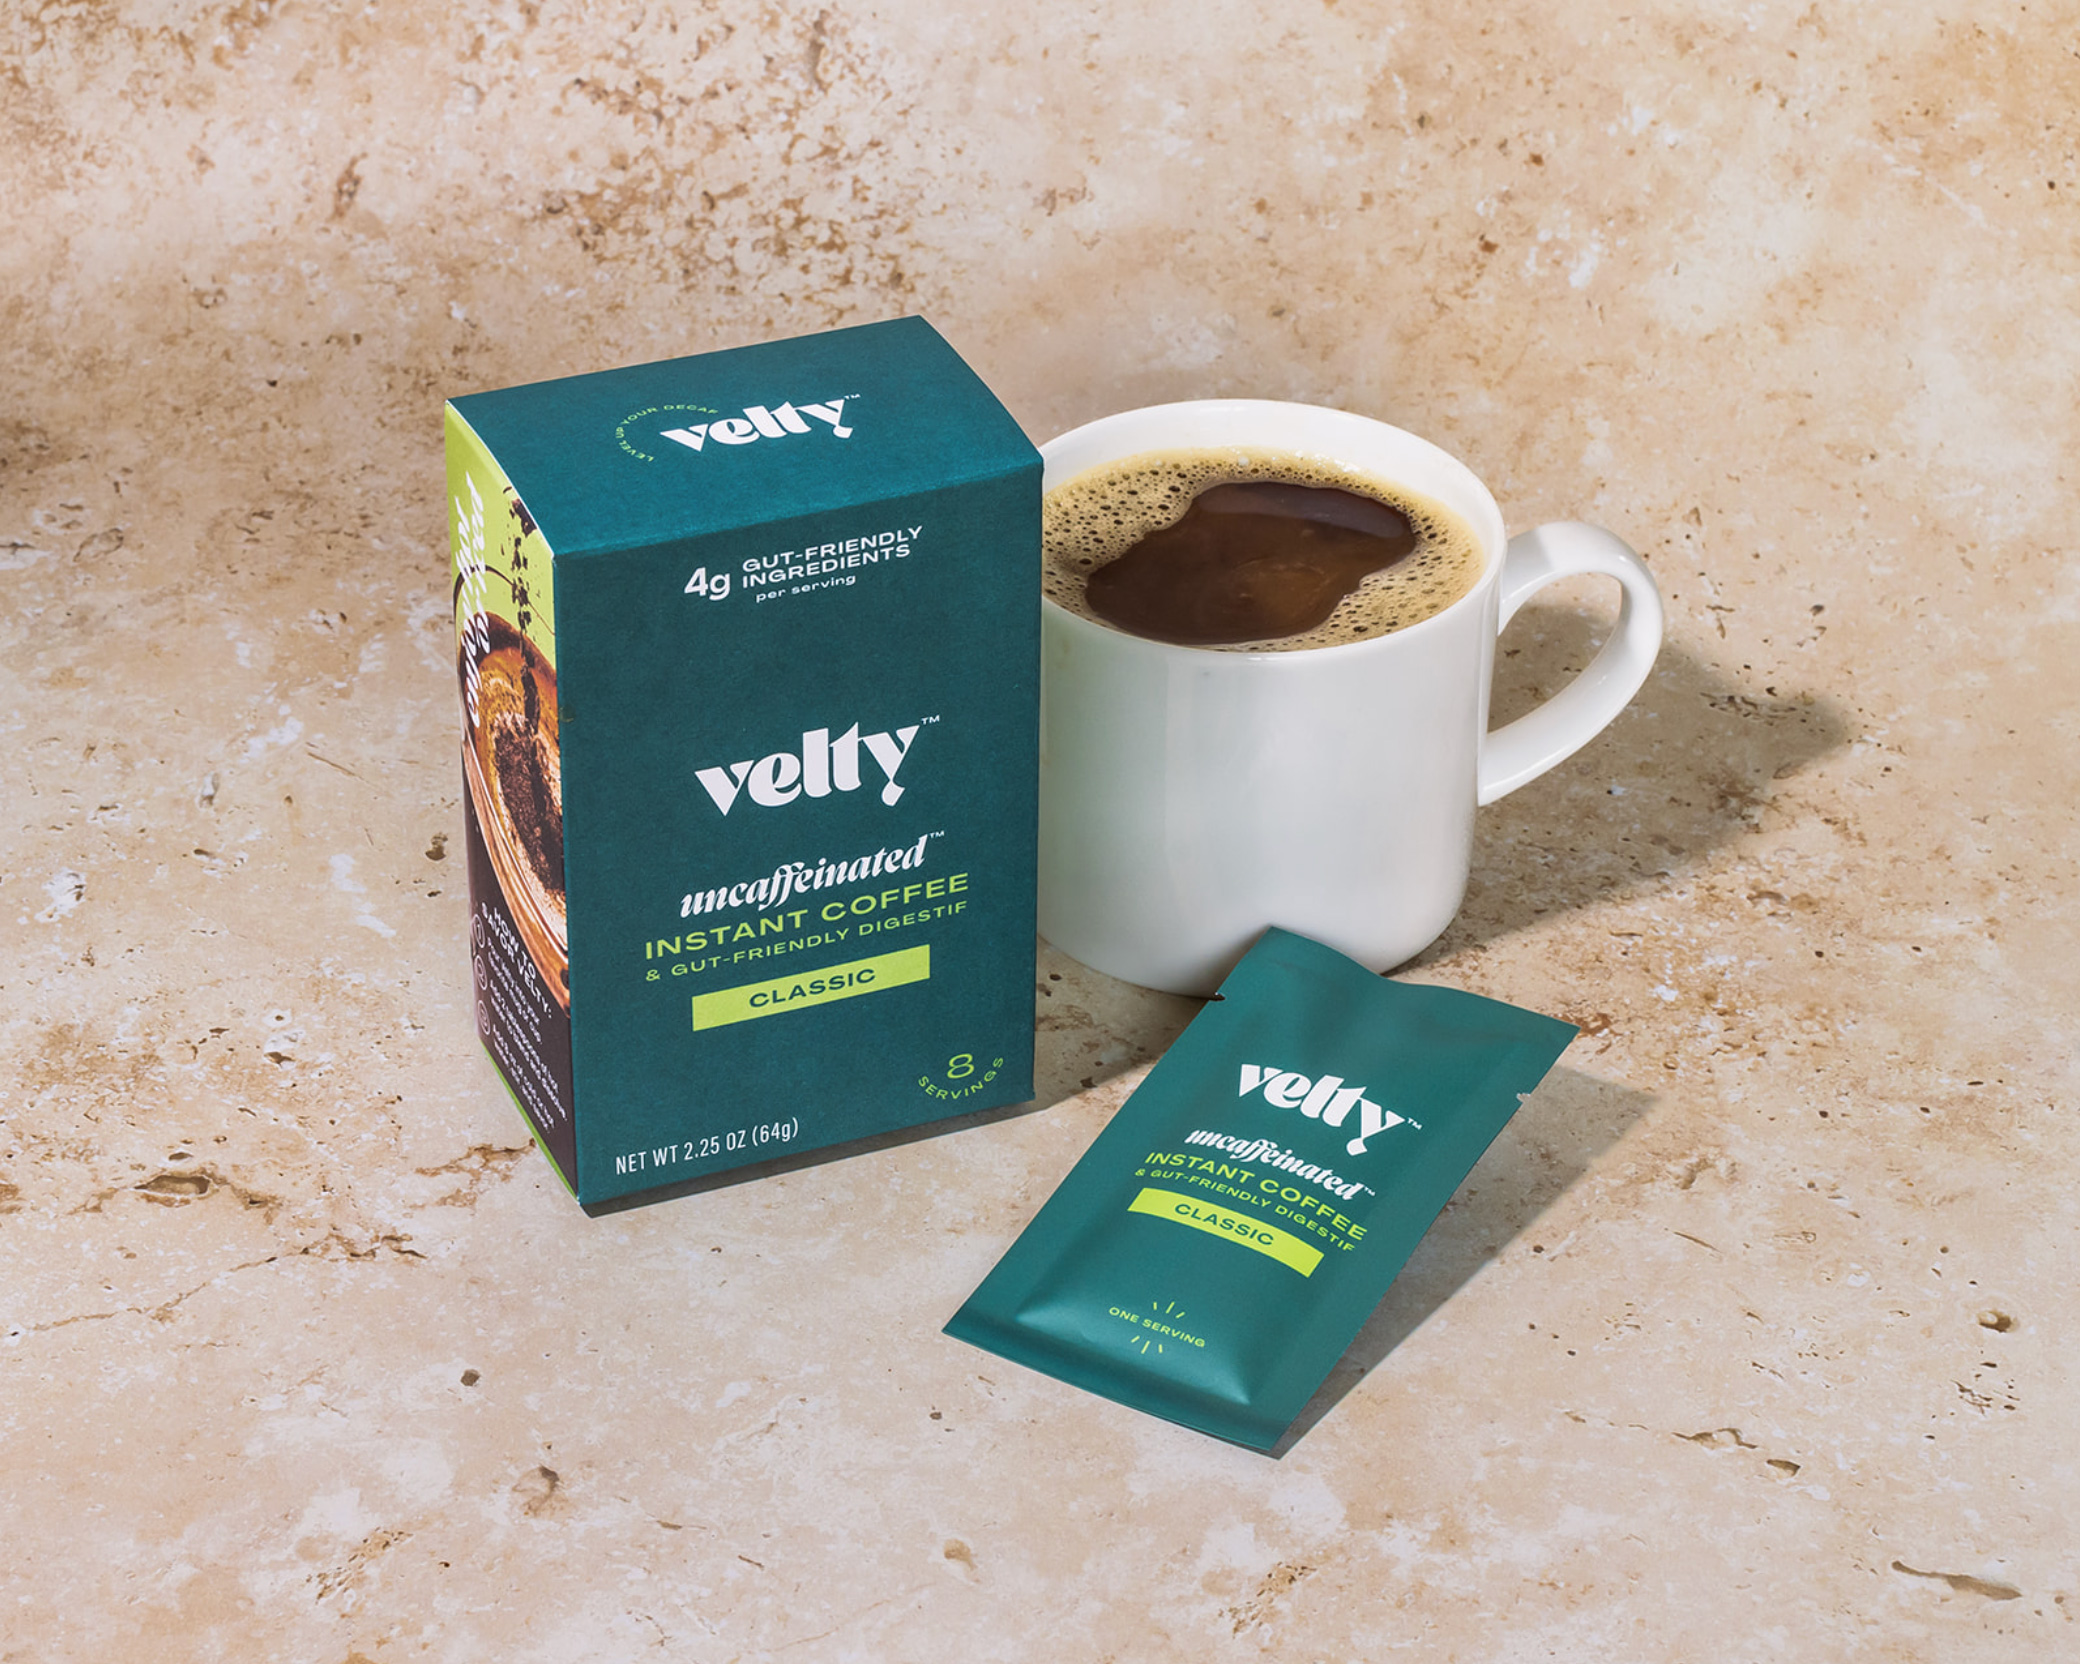 velty instant decaf coffee, one of the best instant coffees, next to a coffee mug